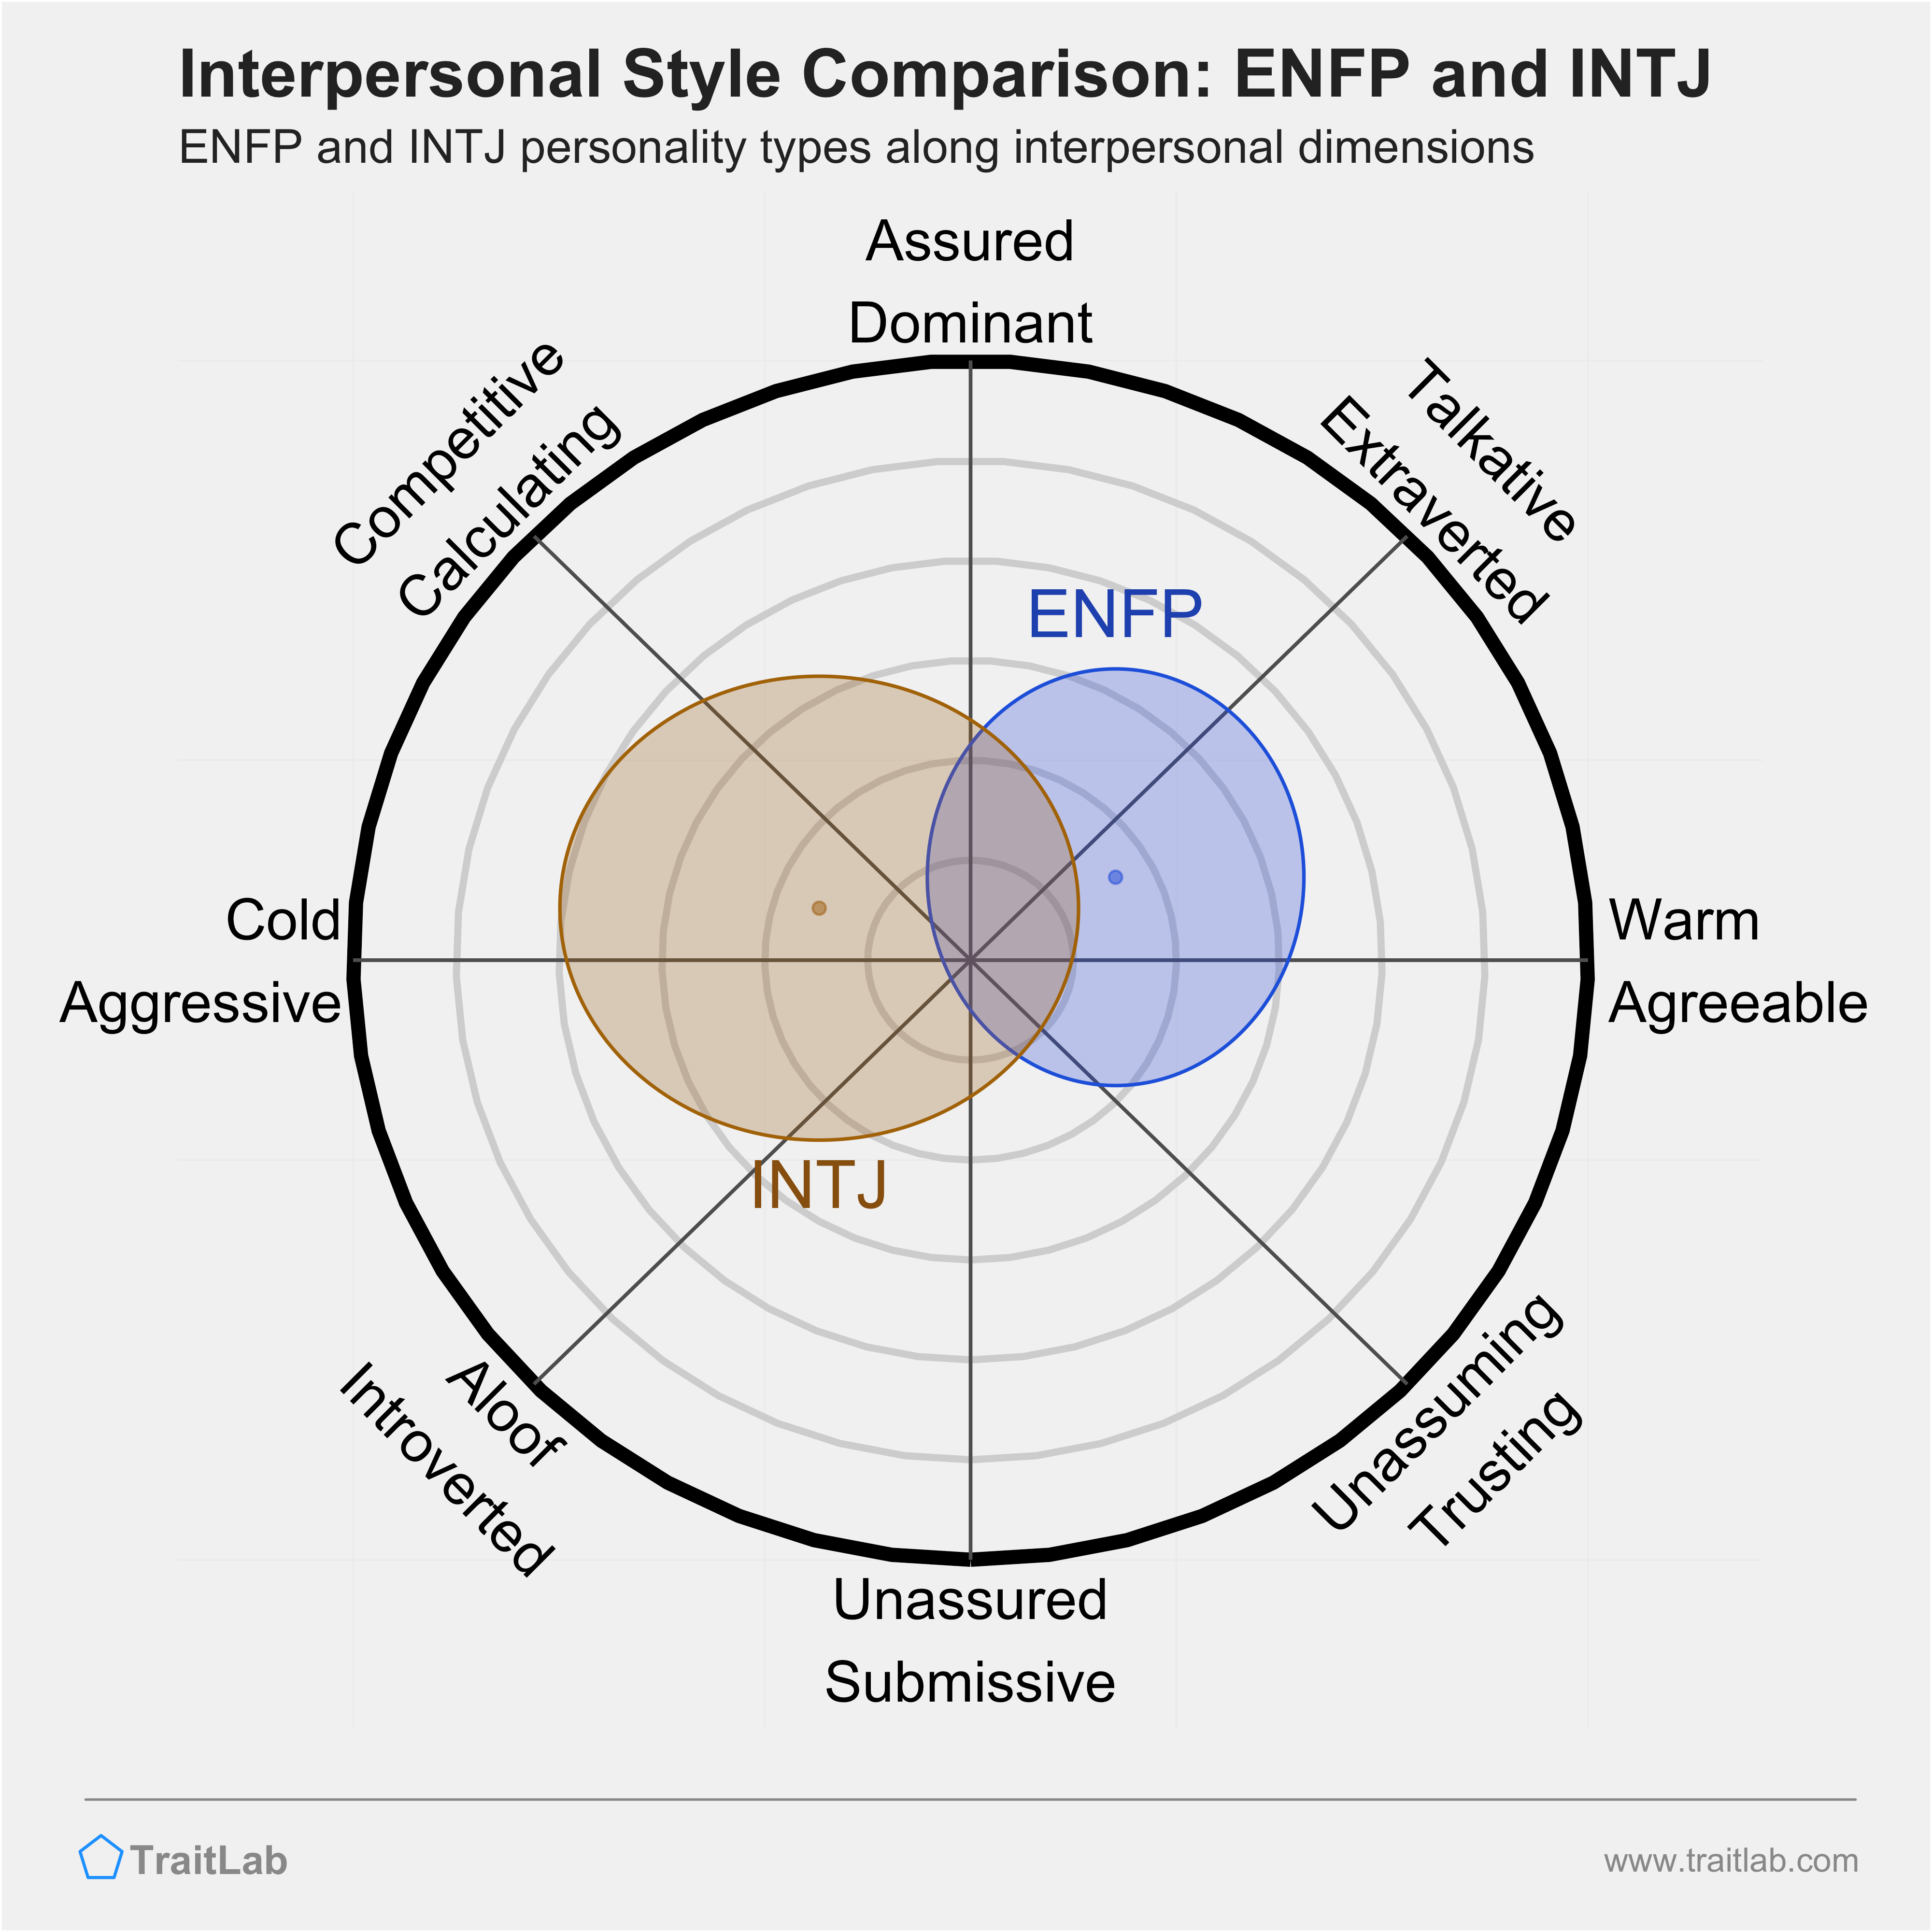 ENFP and INTJ comparison across interpersonal dimensions